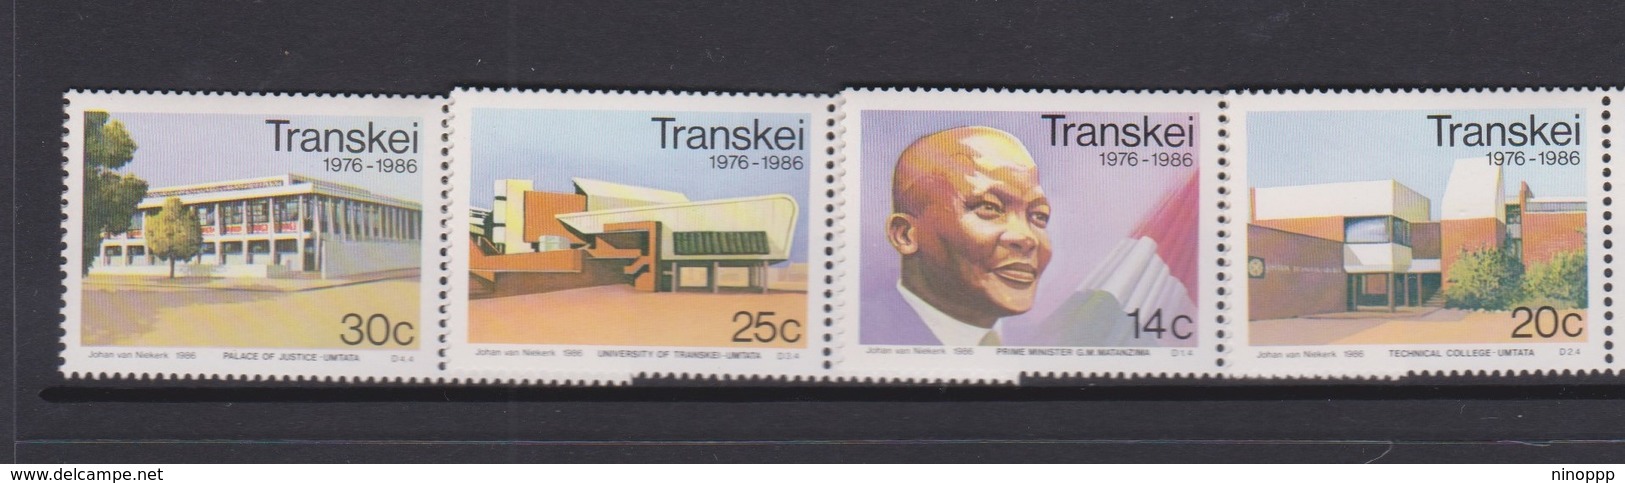 South Africa-Transkei SG 193-196 1986 10th Anniversary Of Independence, Mint Never Hinged - Transkei